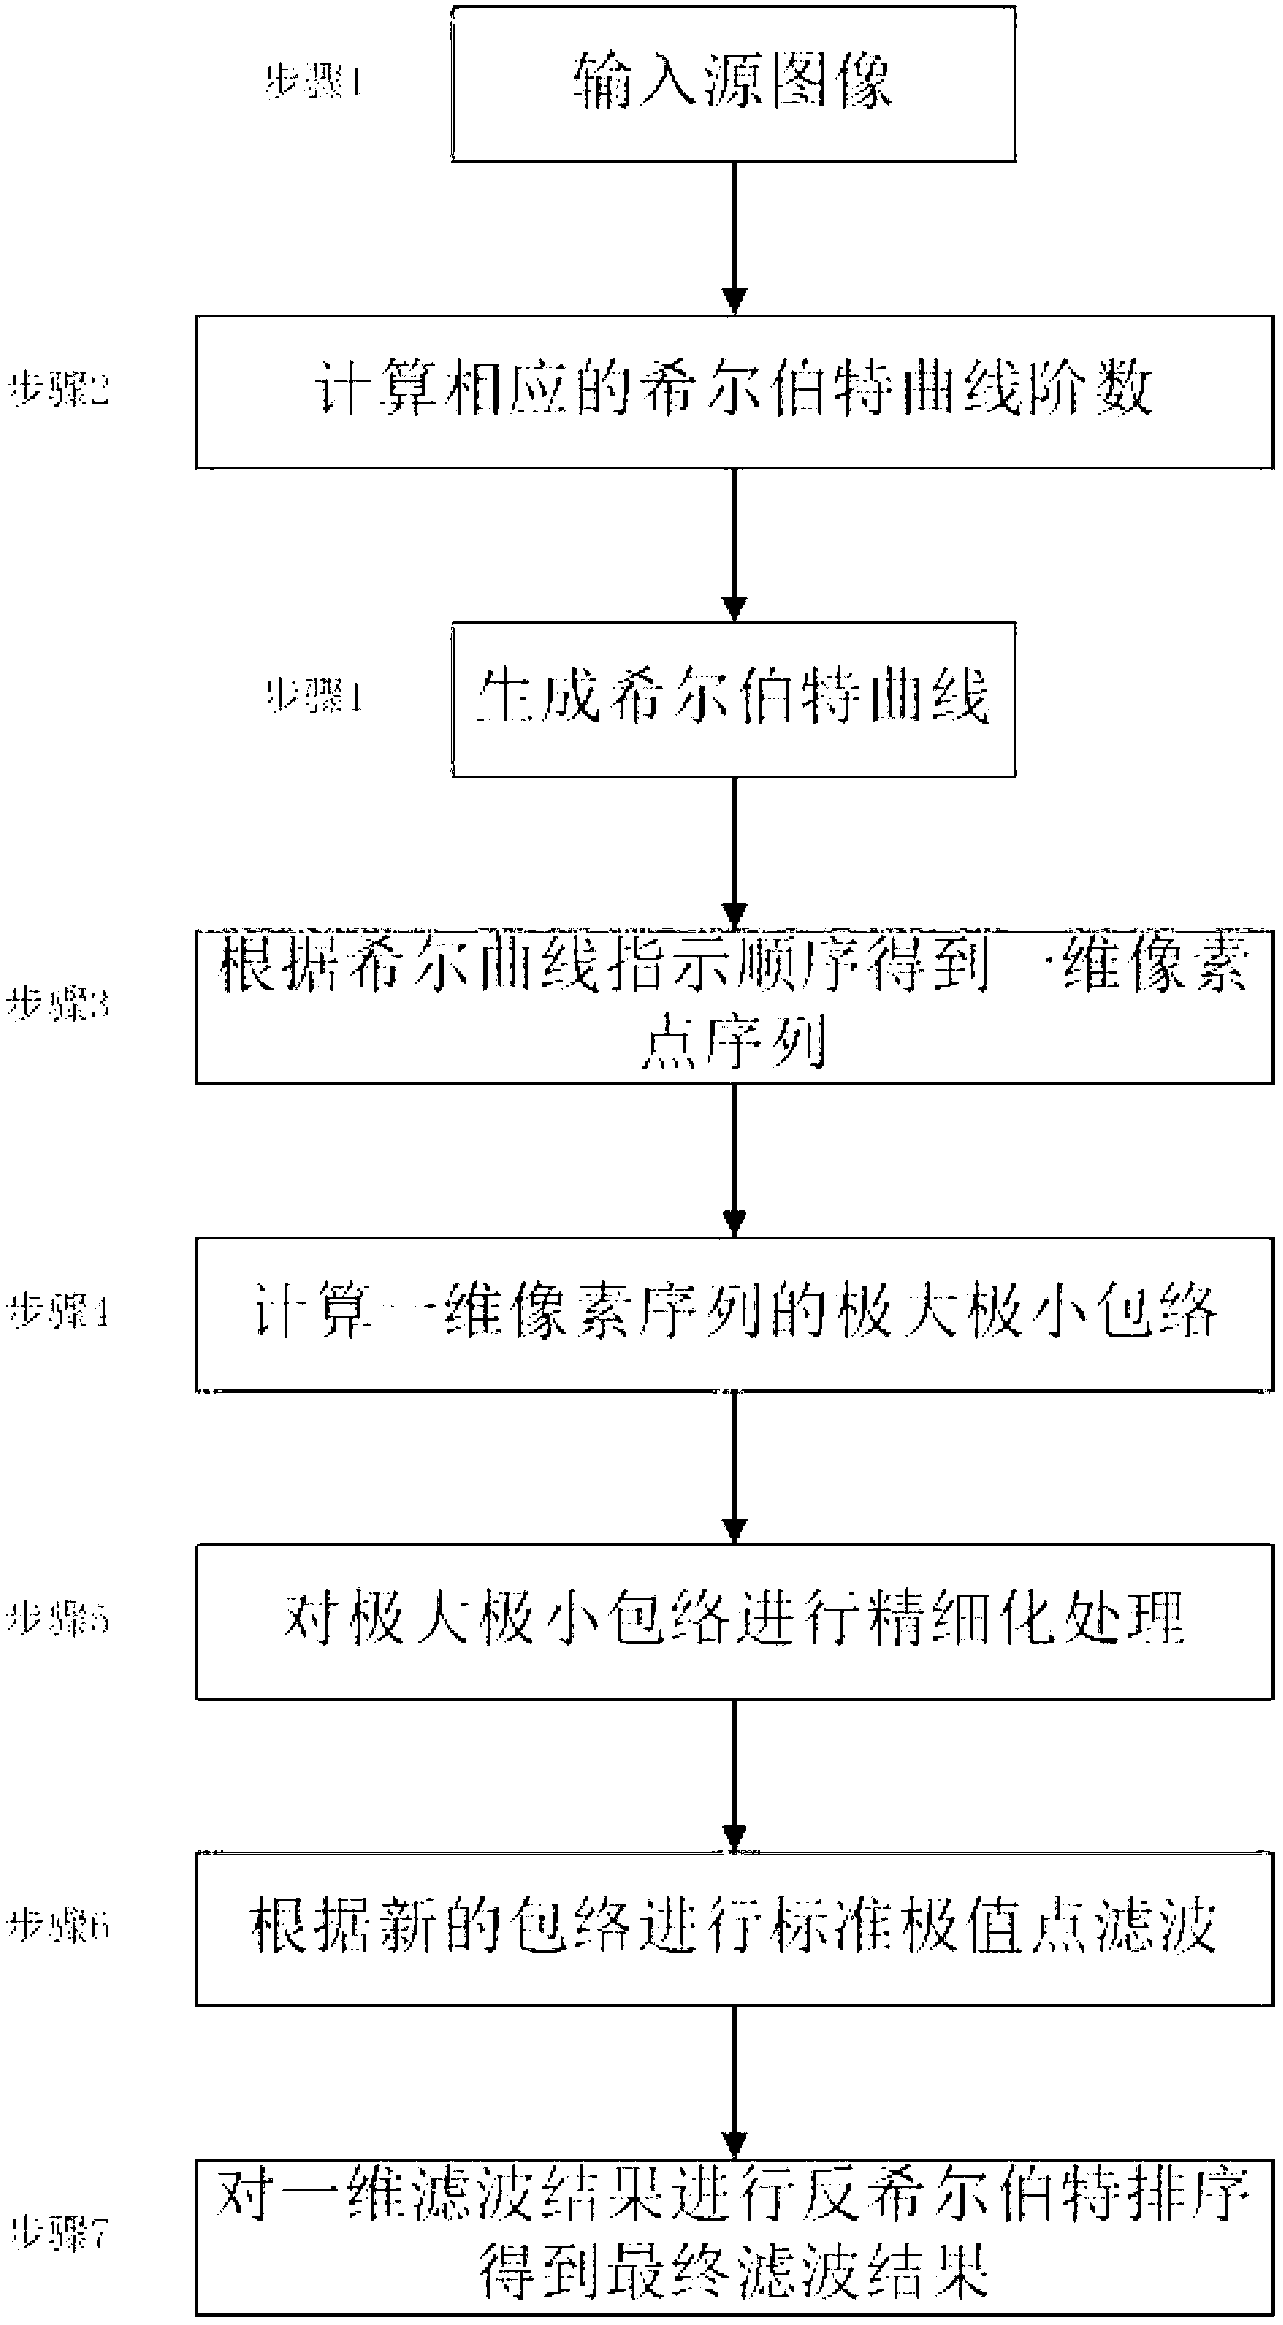 Fast image filtering method based on space filling curves and extreme points